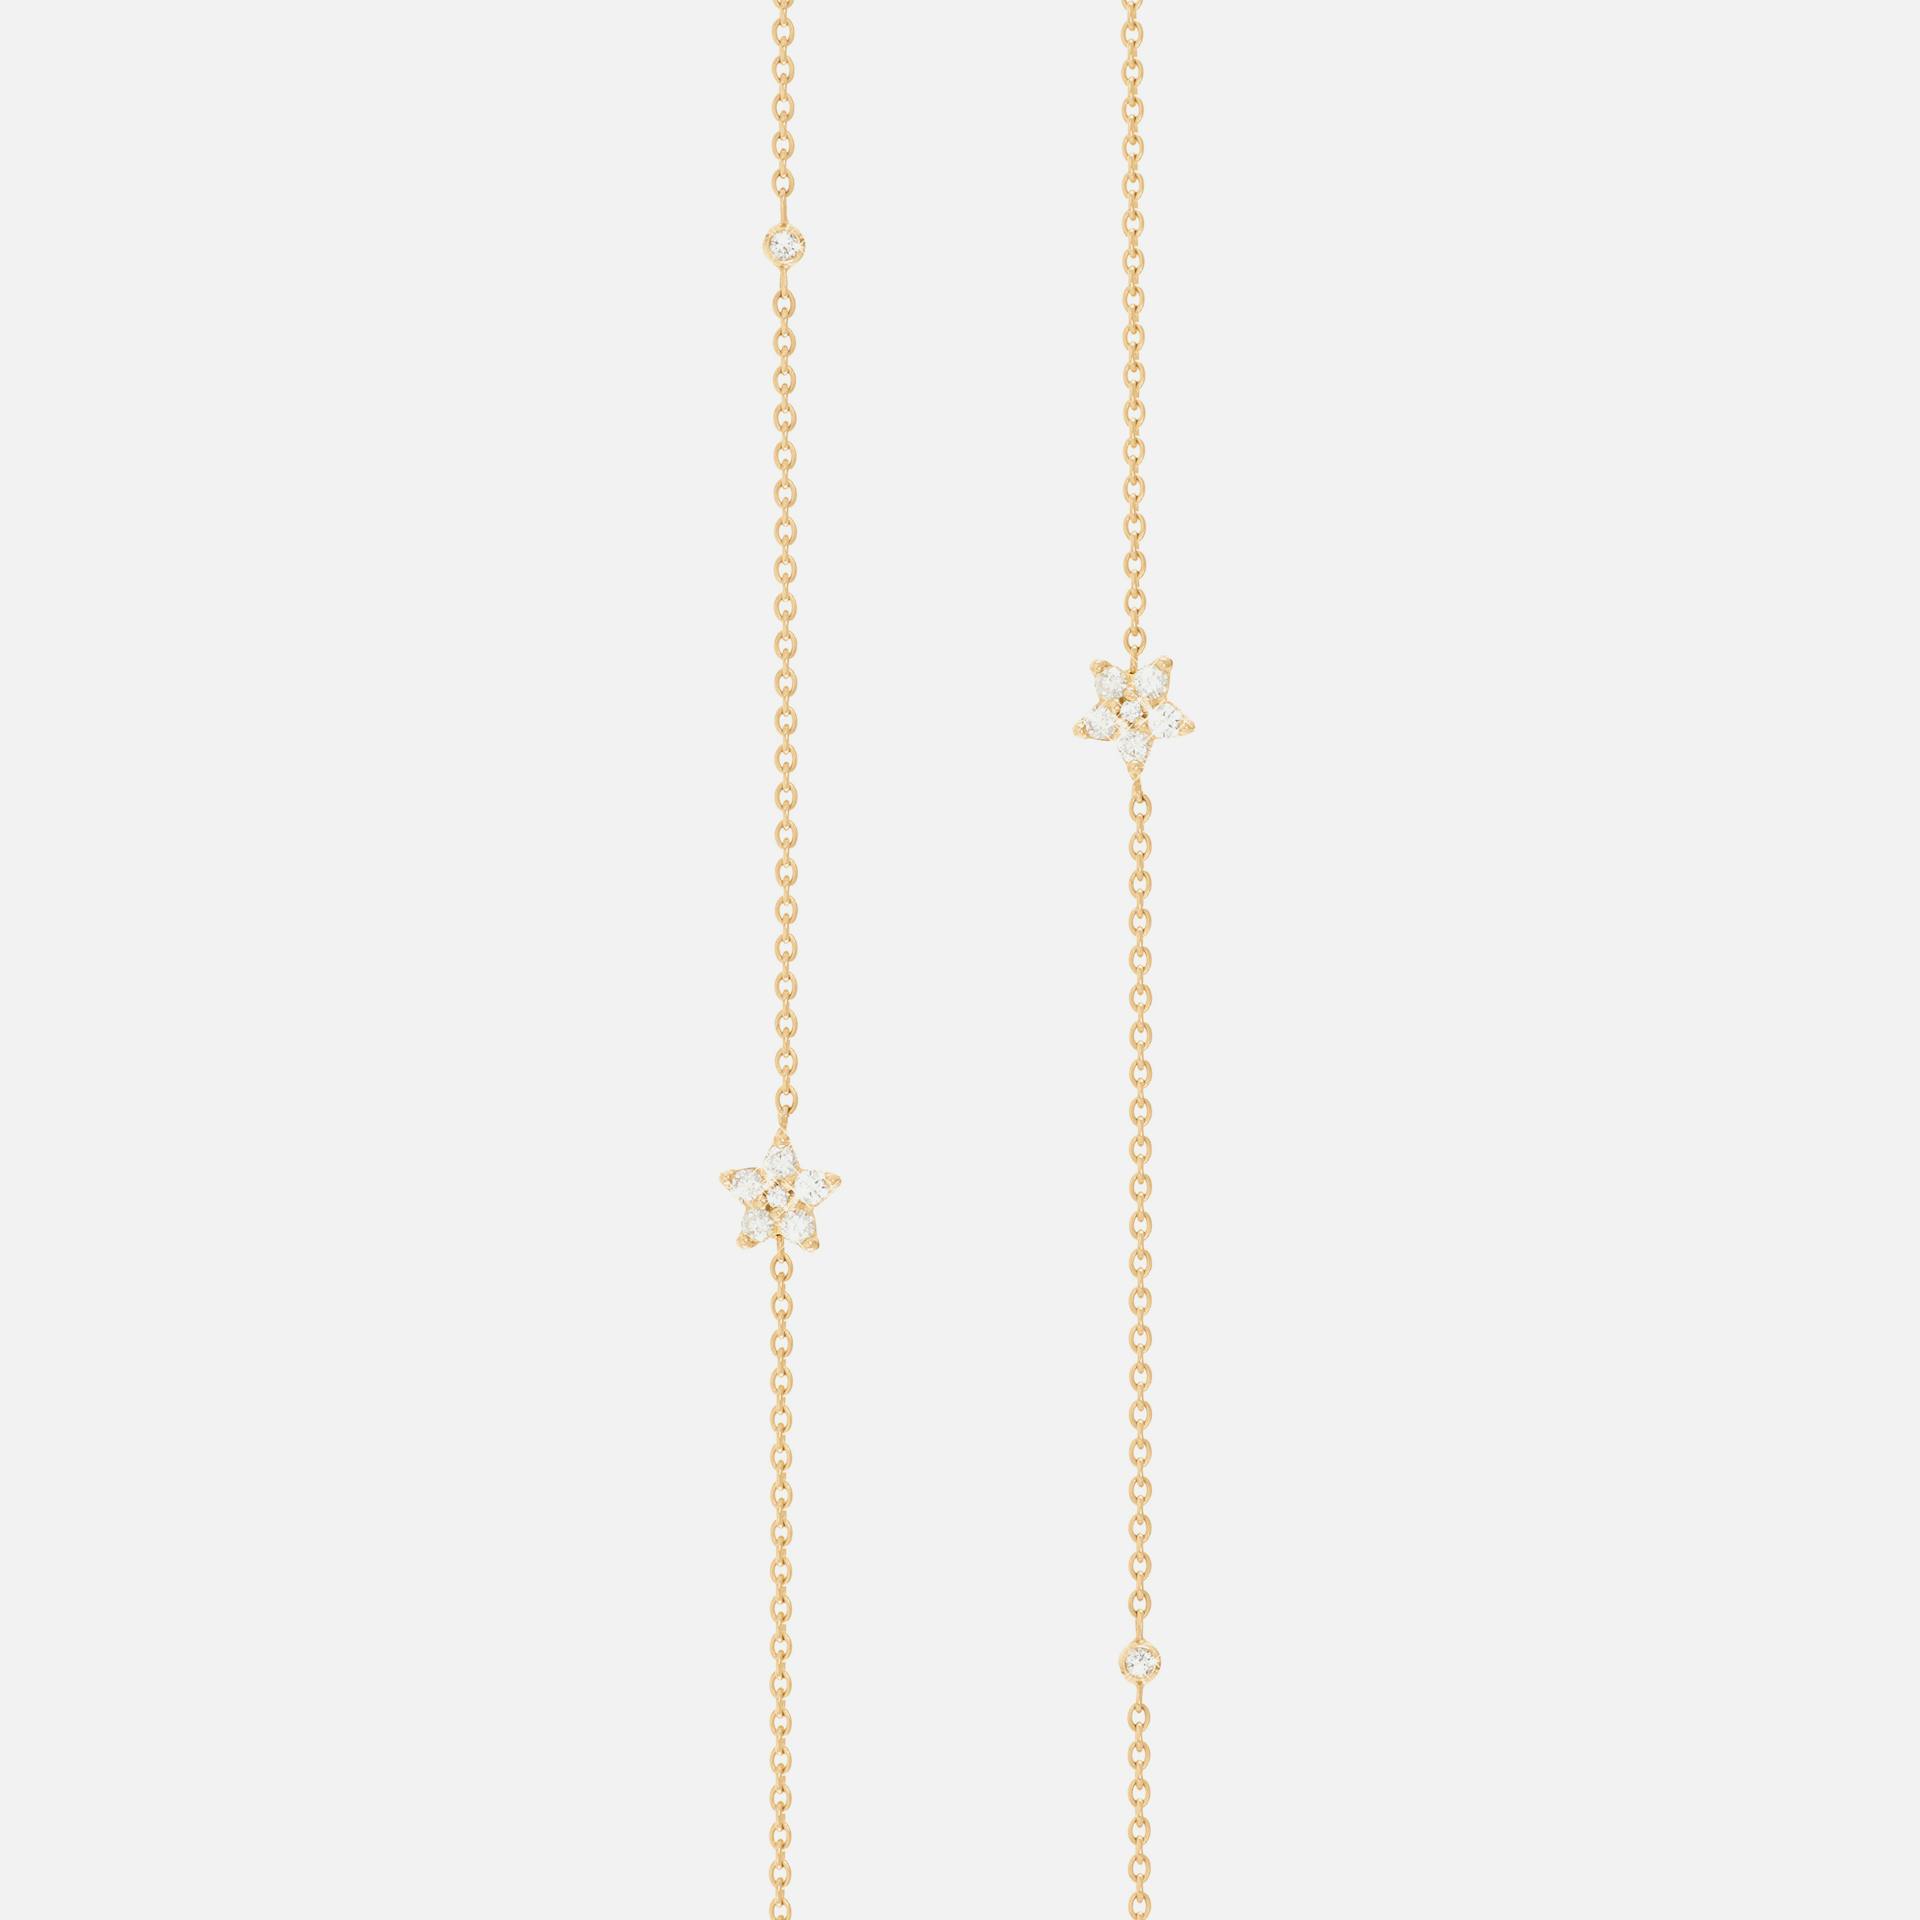 Shooting Stars Collier Extension in Gold with Diamonds | Ole Lynggaard Copenhagen